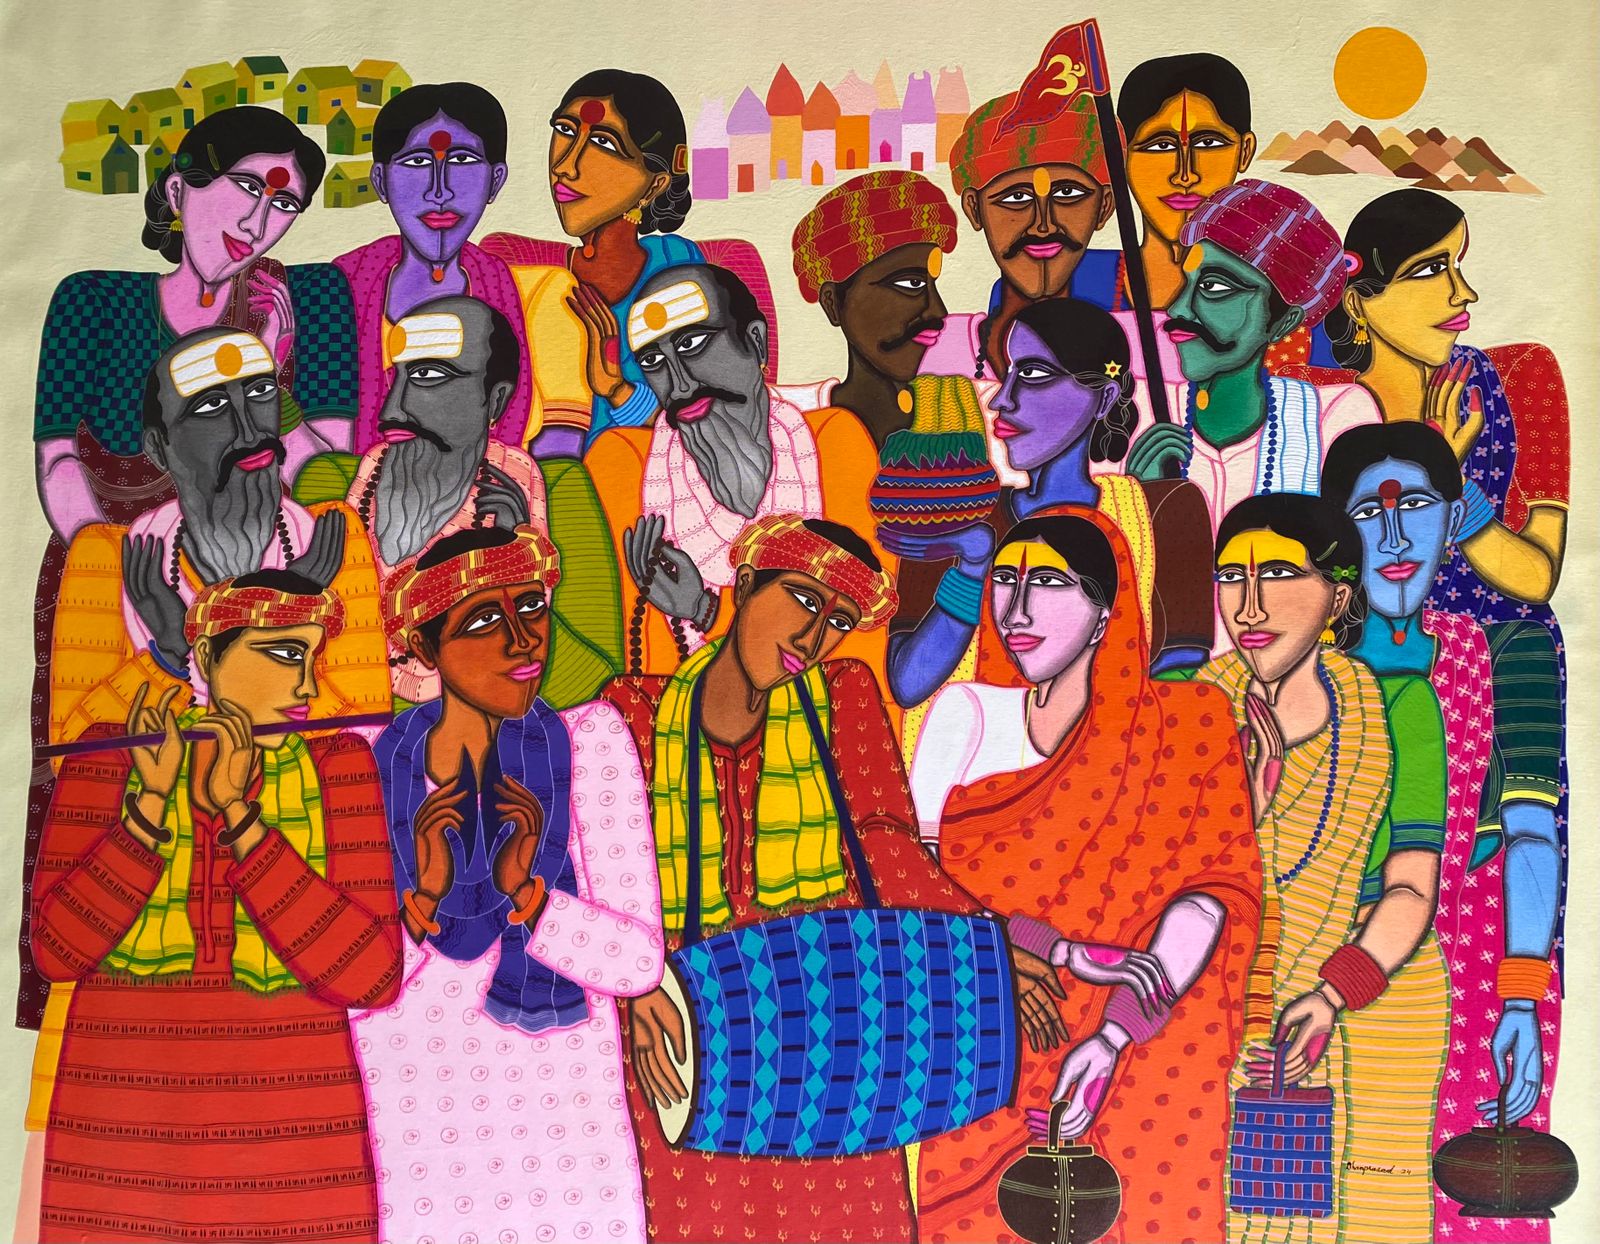 Figurative Painting with Acrylic on Canvas "At Pilgrims (782)" art by Dhan Prasad